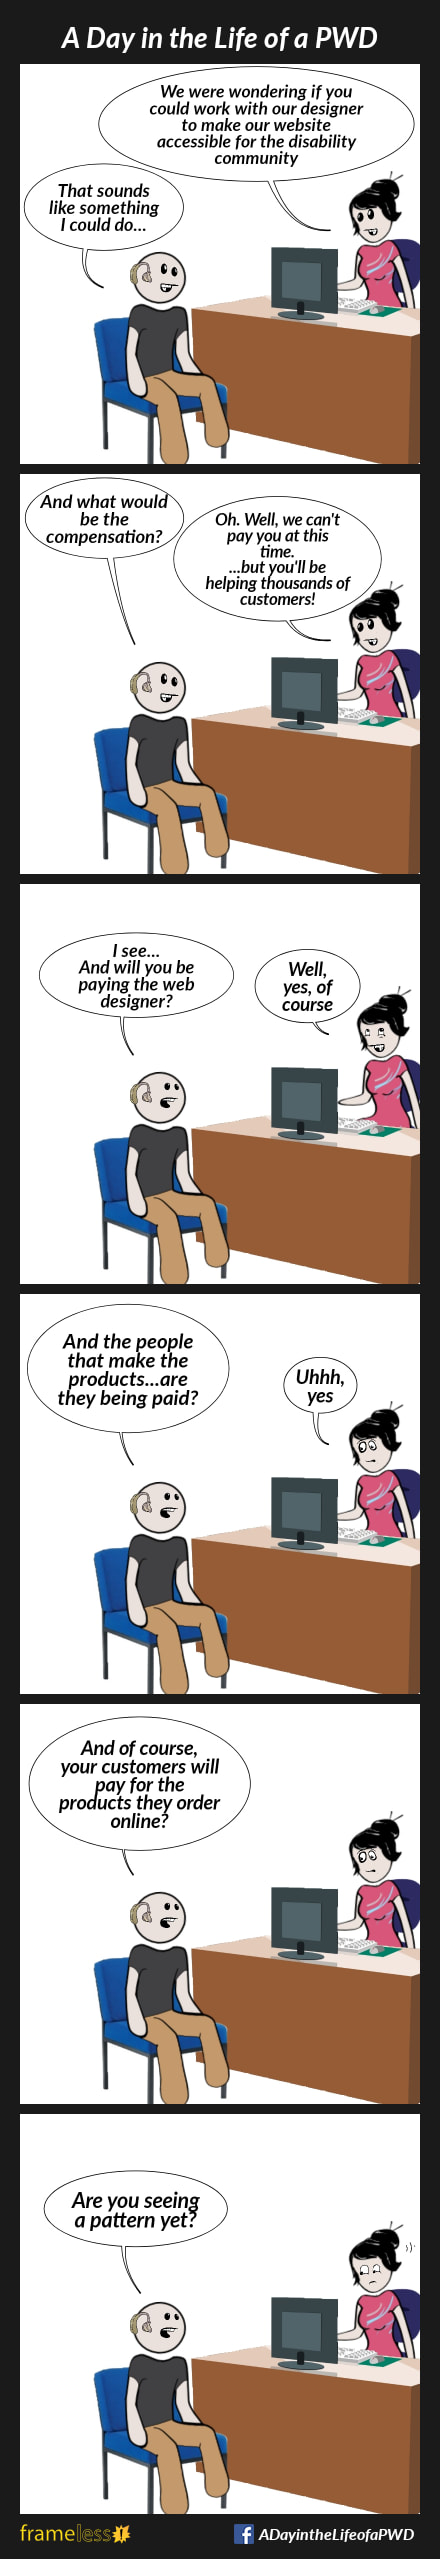 COMIC STRIP 
A Day in the Life of a PWD (Person With a Disability) 

Frame 1:
A man wearing hearing aids is sitting  in a woman's office.
WOMAN: We were wondering if you could work with our designer to make our website accessible for the disability community. 
MAN: That sounds like something I could do...

Frame 2:
MAN: And what would be the compensation?
WOMAN: Oh. Well, we can't pay you at this time...but you'll be helping thousands of customers!

Frame 3:
MAN: I see...and will you be paying the web designer?
WOMAN: Well, yes, of course

Frame 4:
MAN: And the people that make the products...are they being paid?
WOMAN: Uhhh, yes

Frame 5:
MAN: And, of course, your customers will pay for the products they order online?
WOMAN: ...

Frame 6:
MAN: Are you seeing a pattern yet?